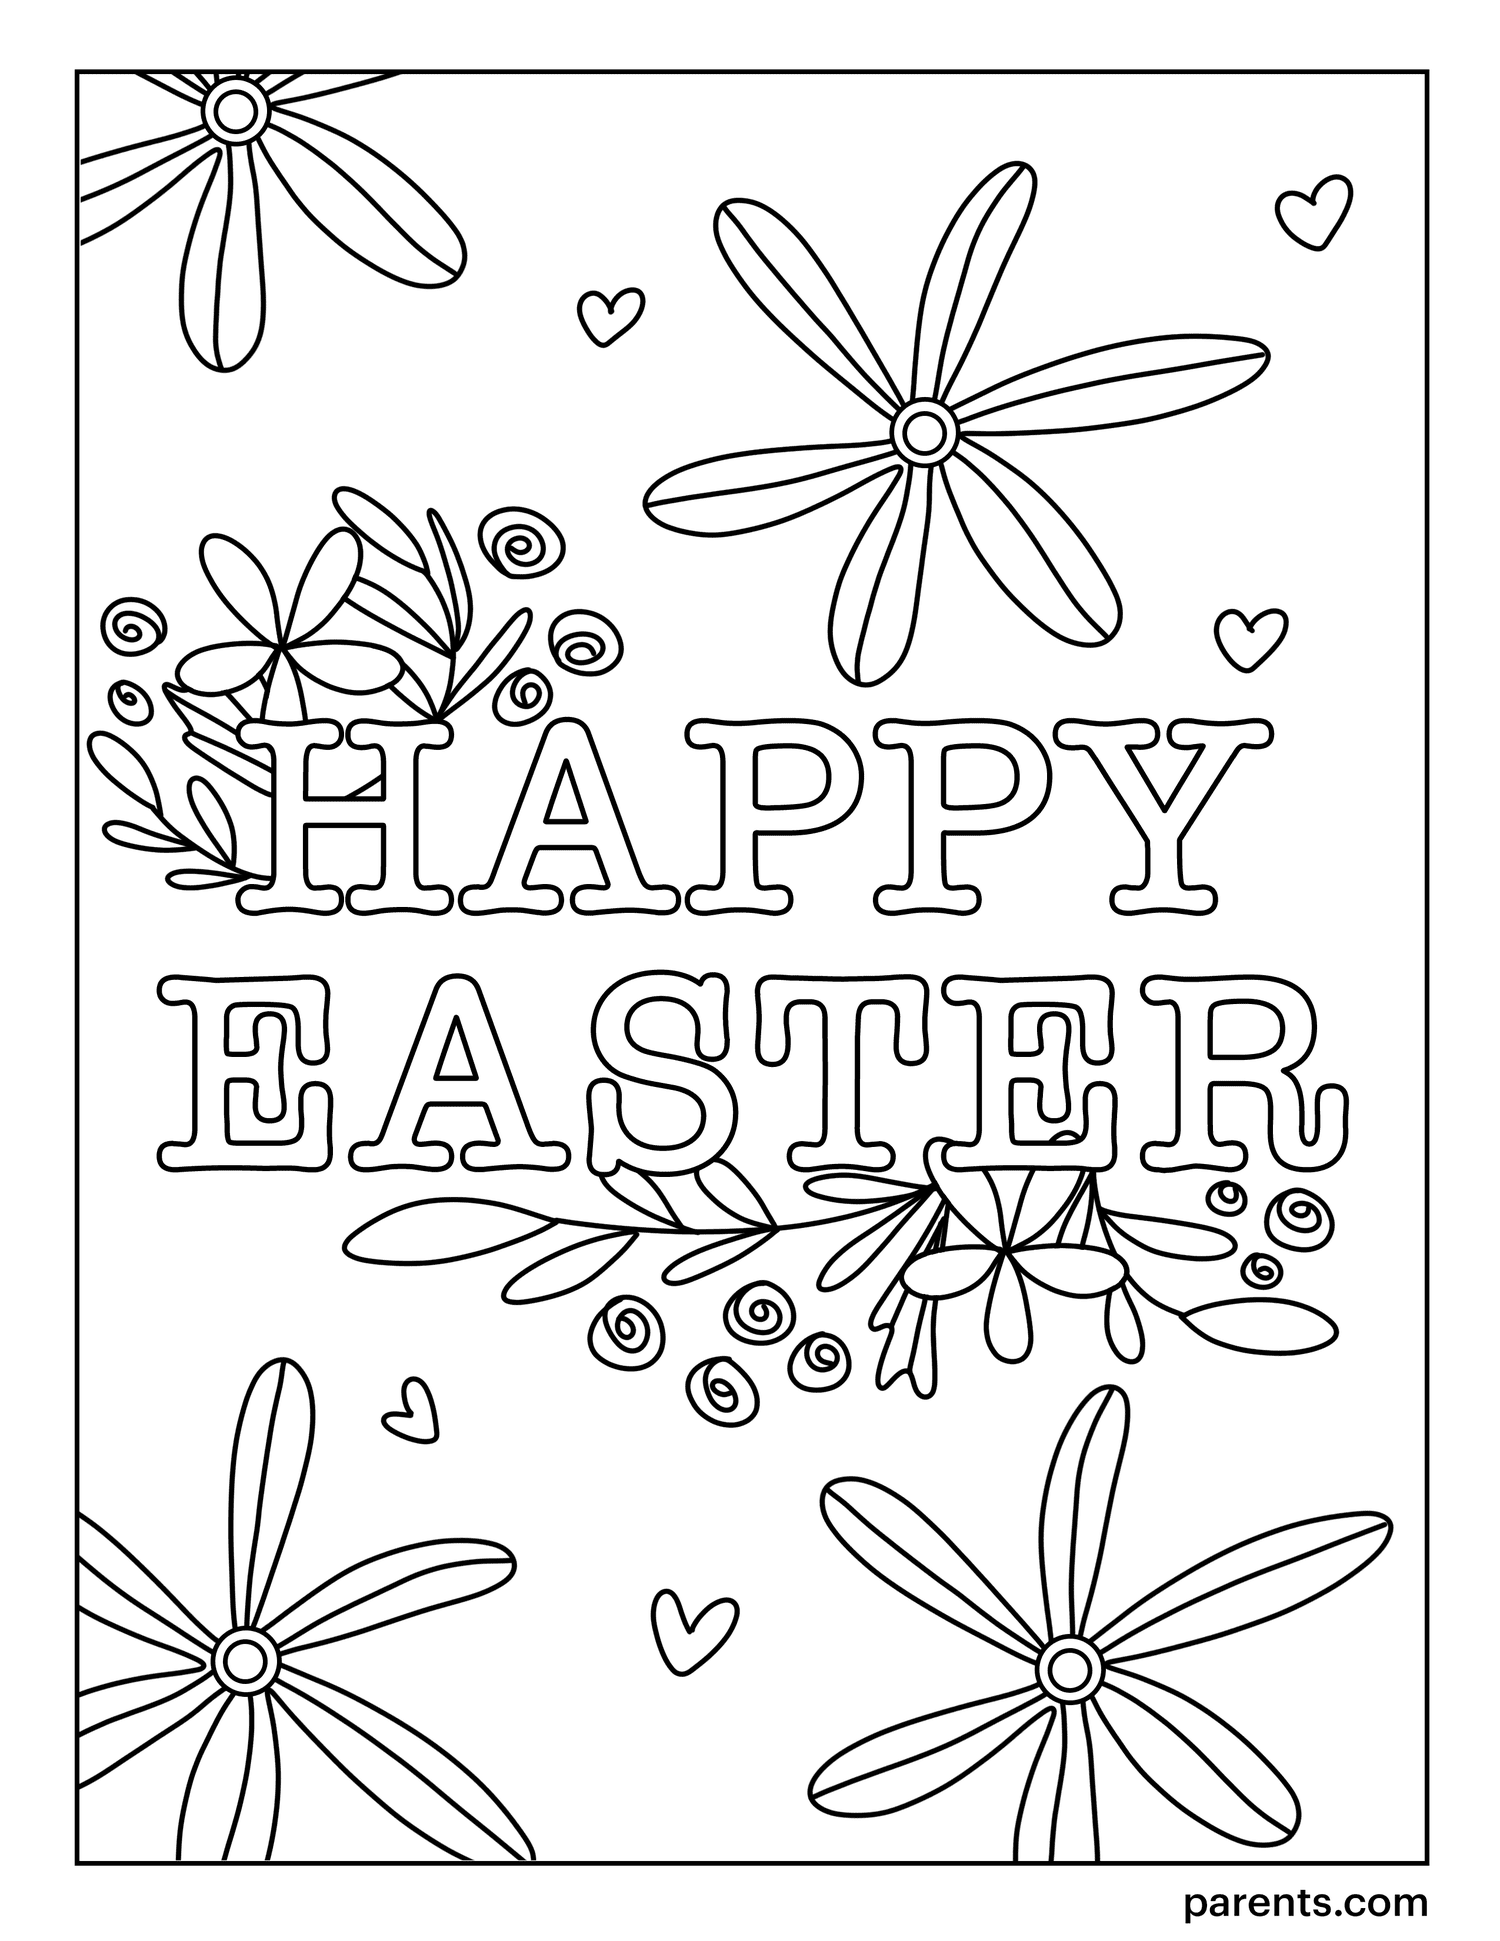 20 Free Easter Coloring Pages for Kids   Parents